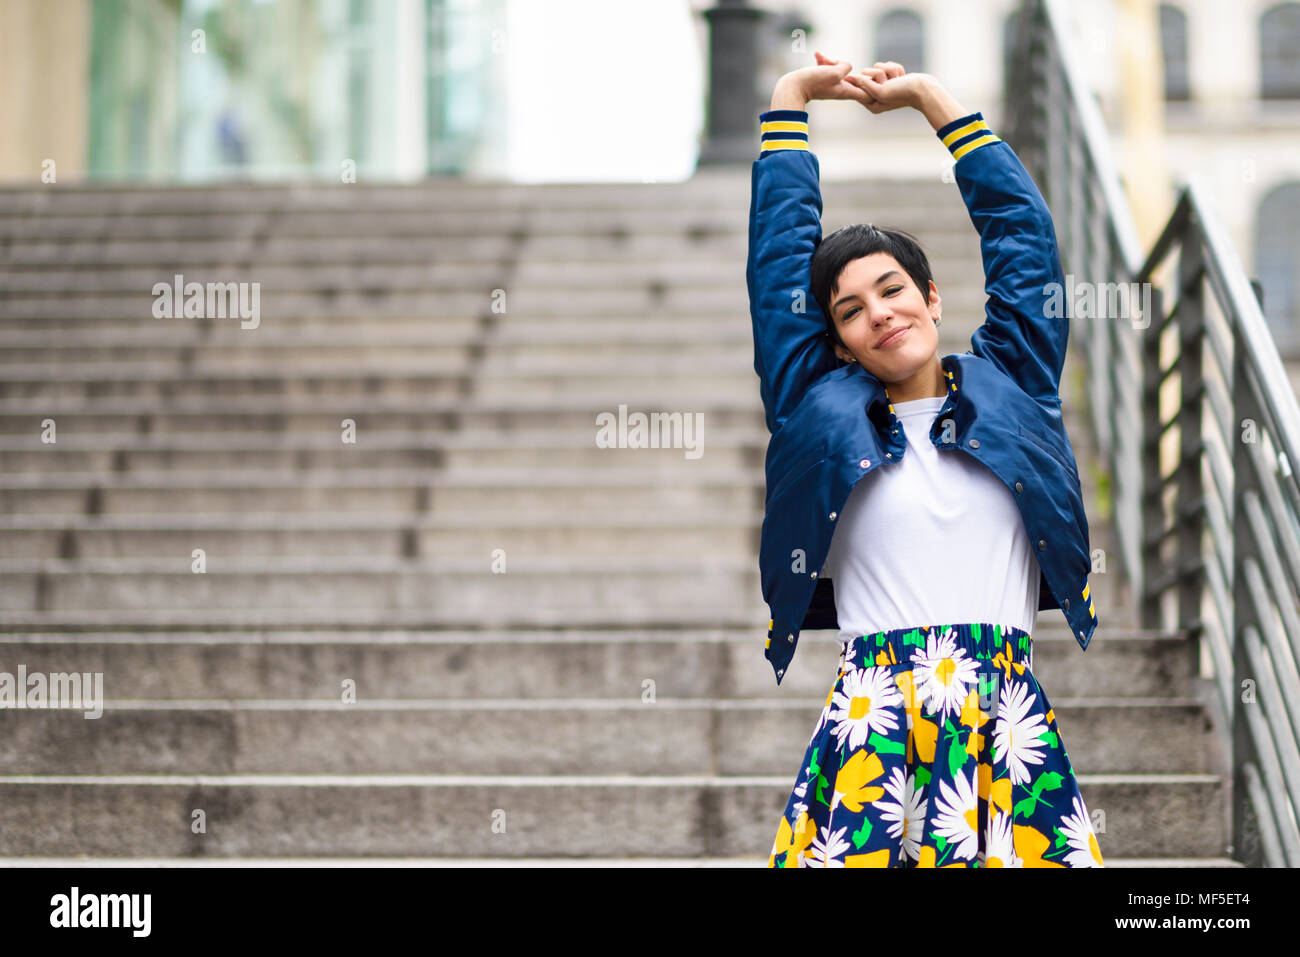 Portrait of fashionable young woman wearing skirt with floral design Stock Photo